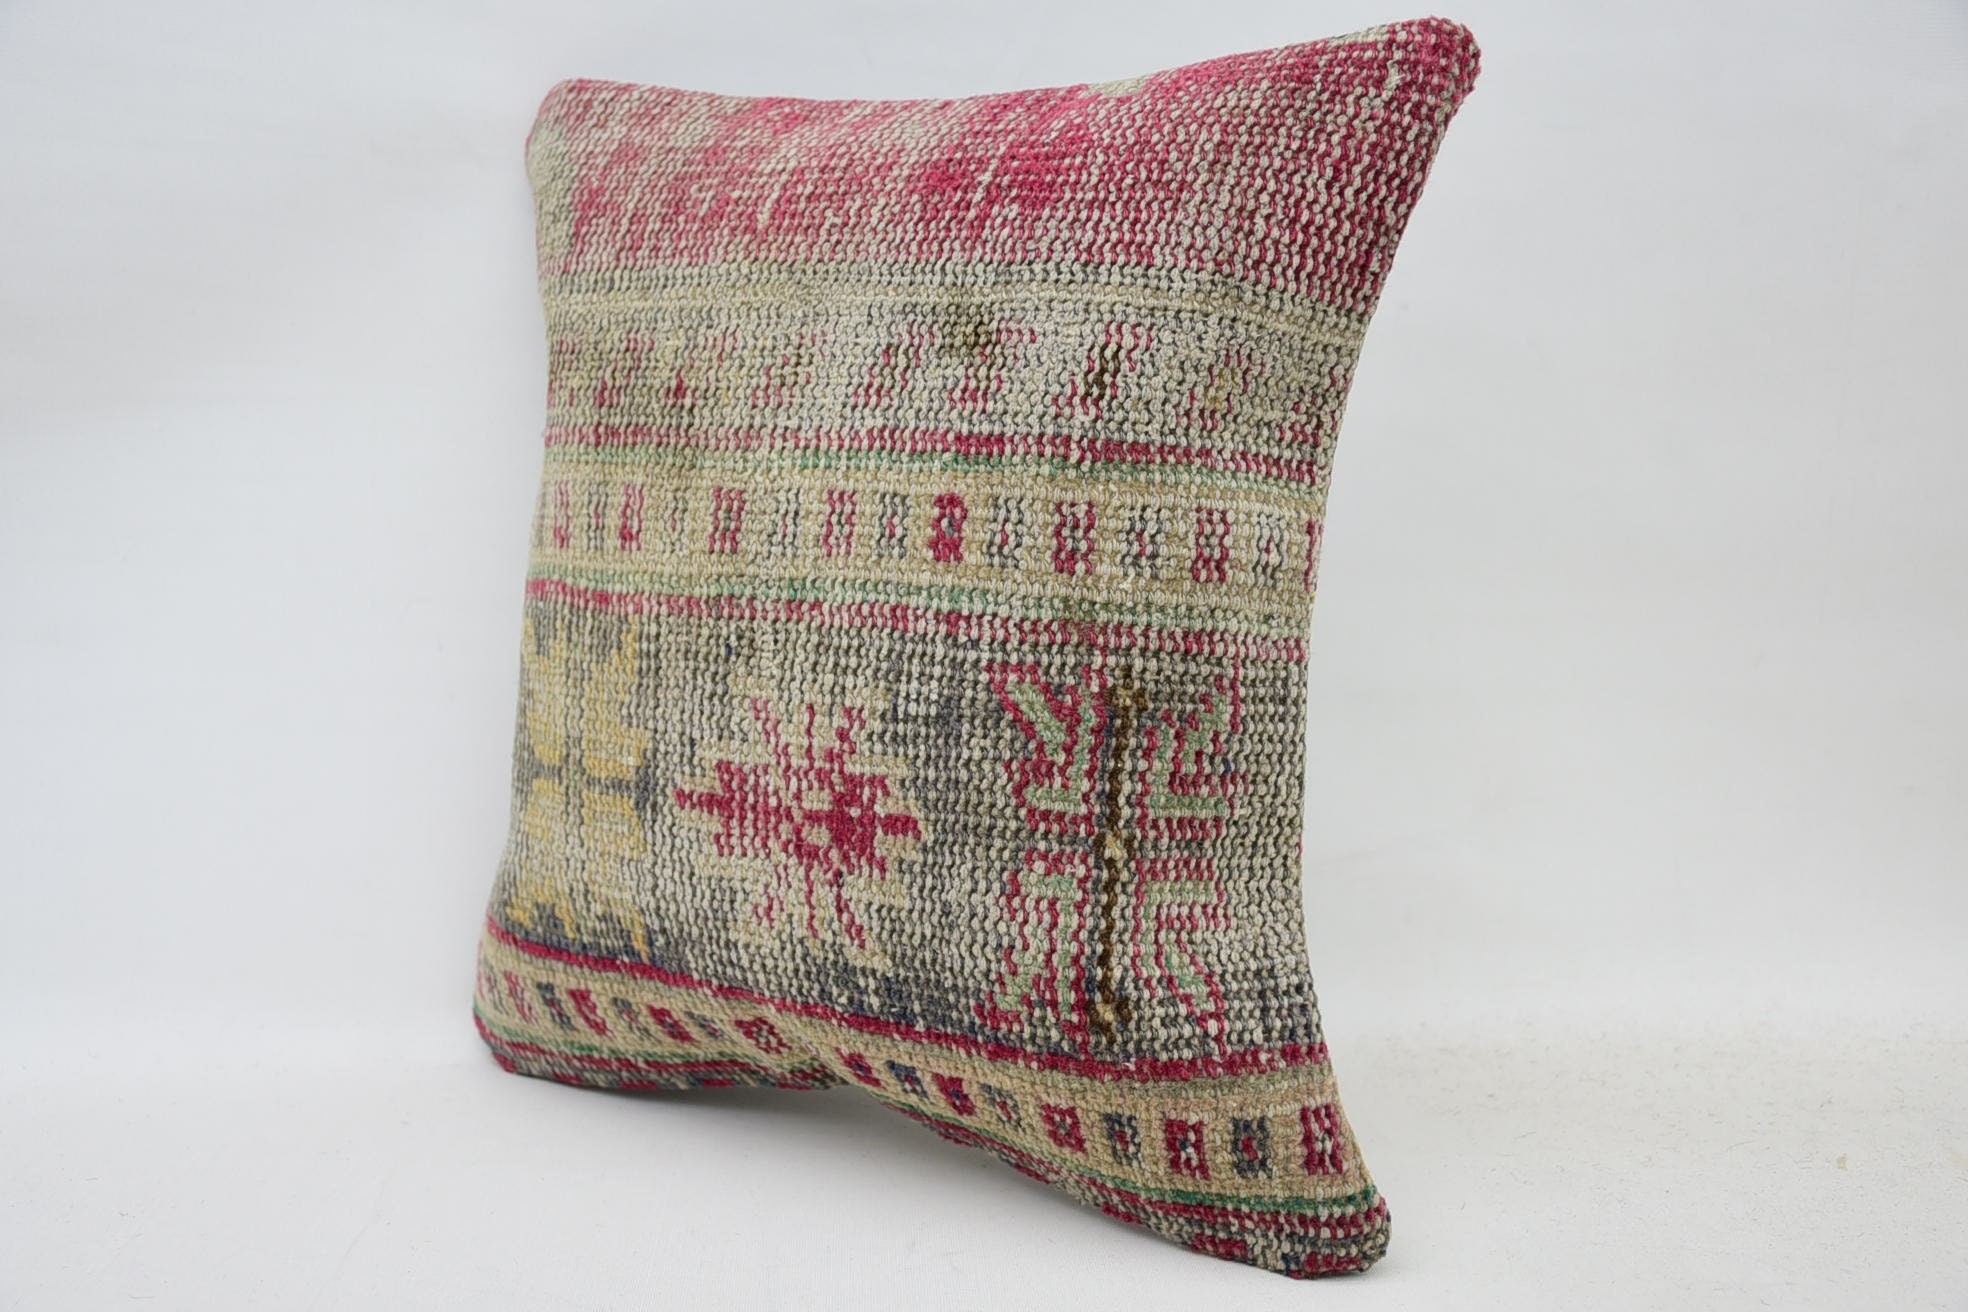 Wool Kilim Pillow Pillow Case, Pillow for Couch, Kilim Pillow Cover, 14"x14" Beige Pillow, Turkish Kilim Pillow, Yoga Pillow Cover